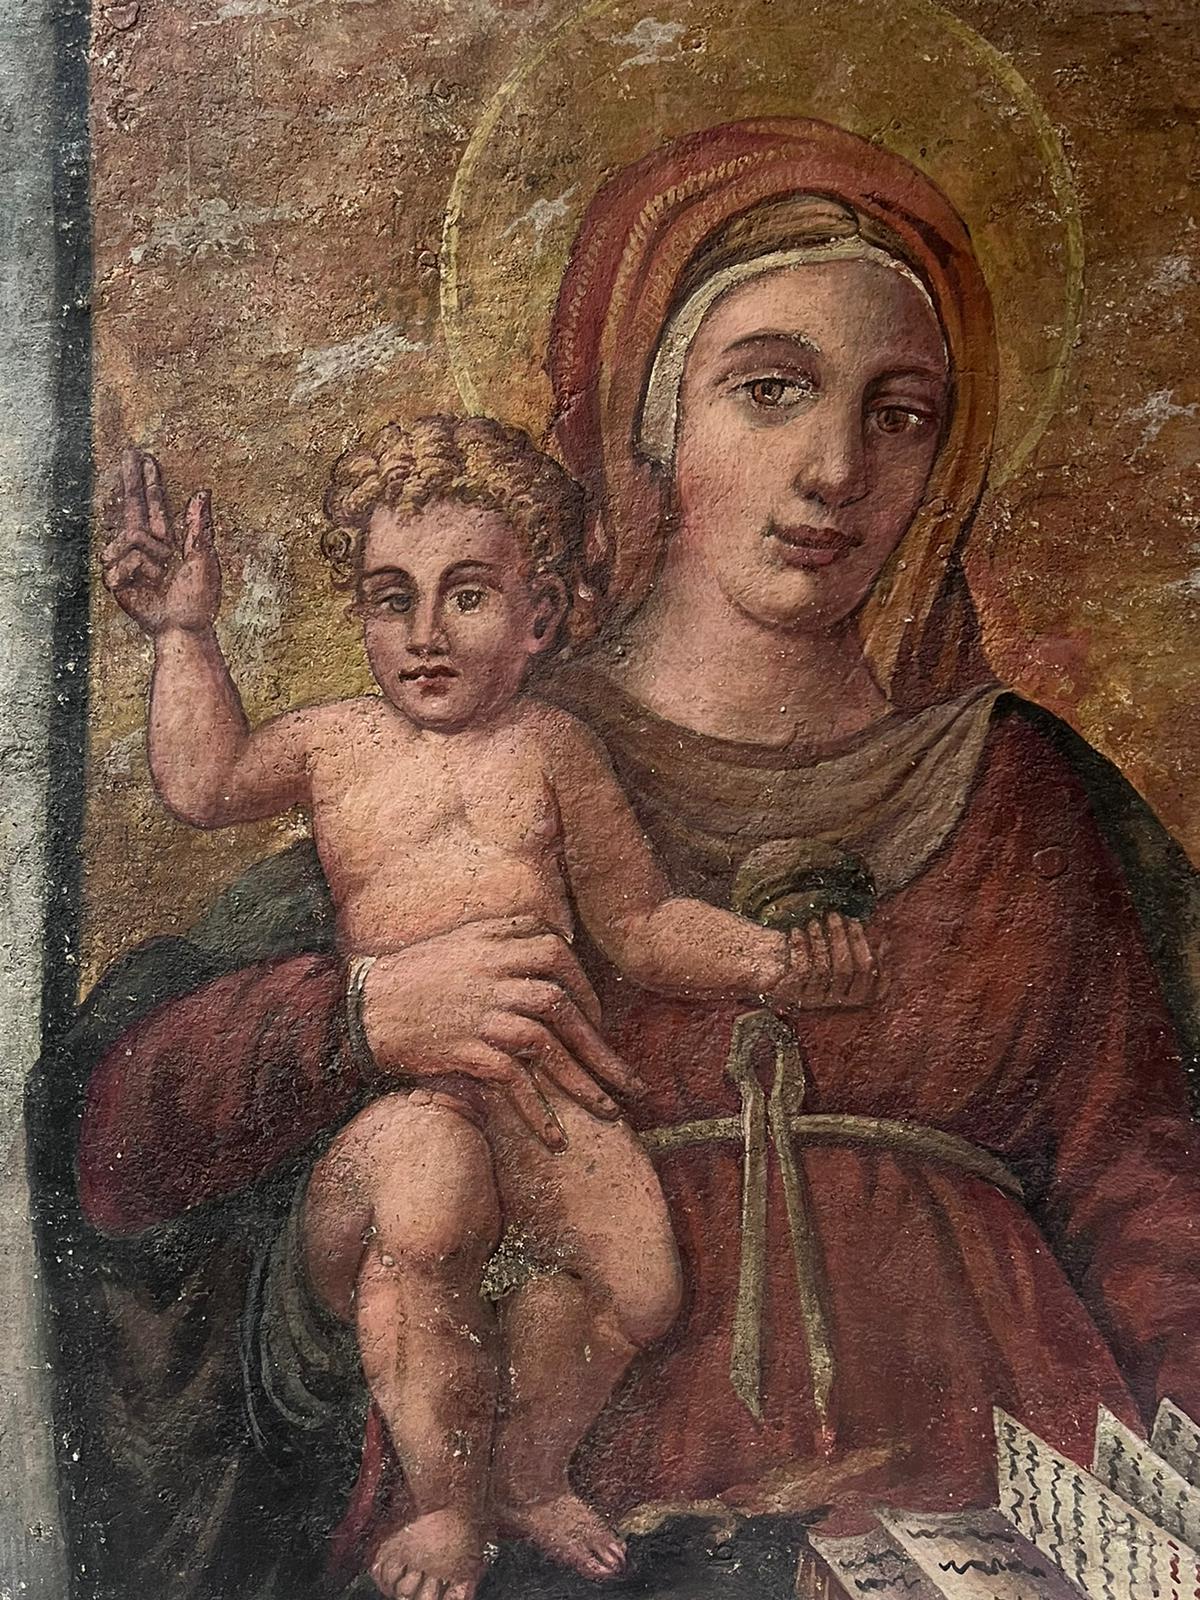 what style is used in the madonna and child painting